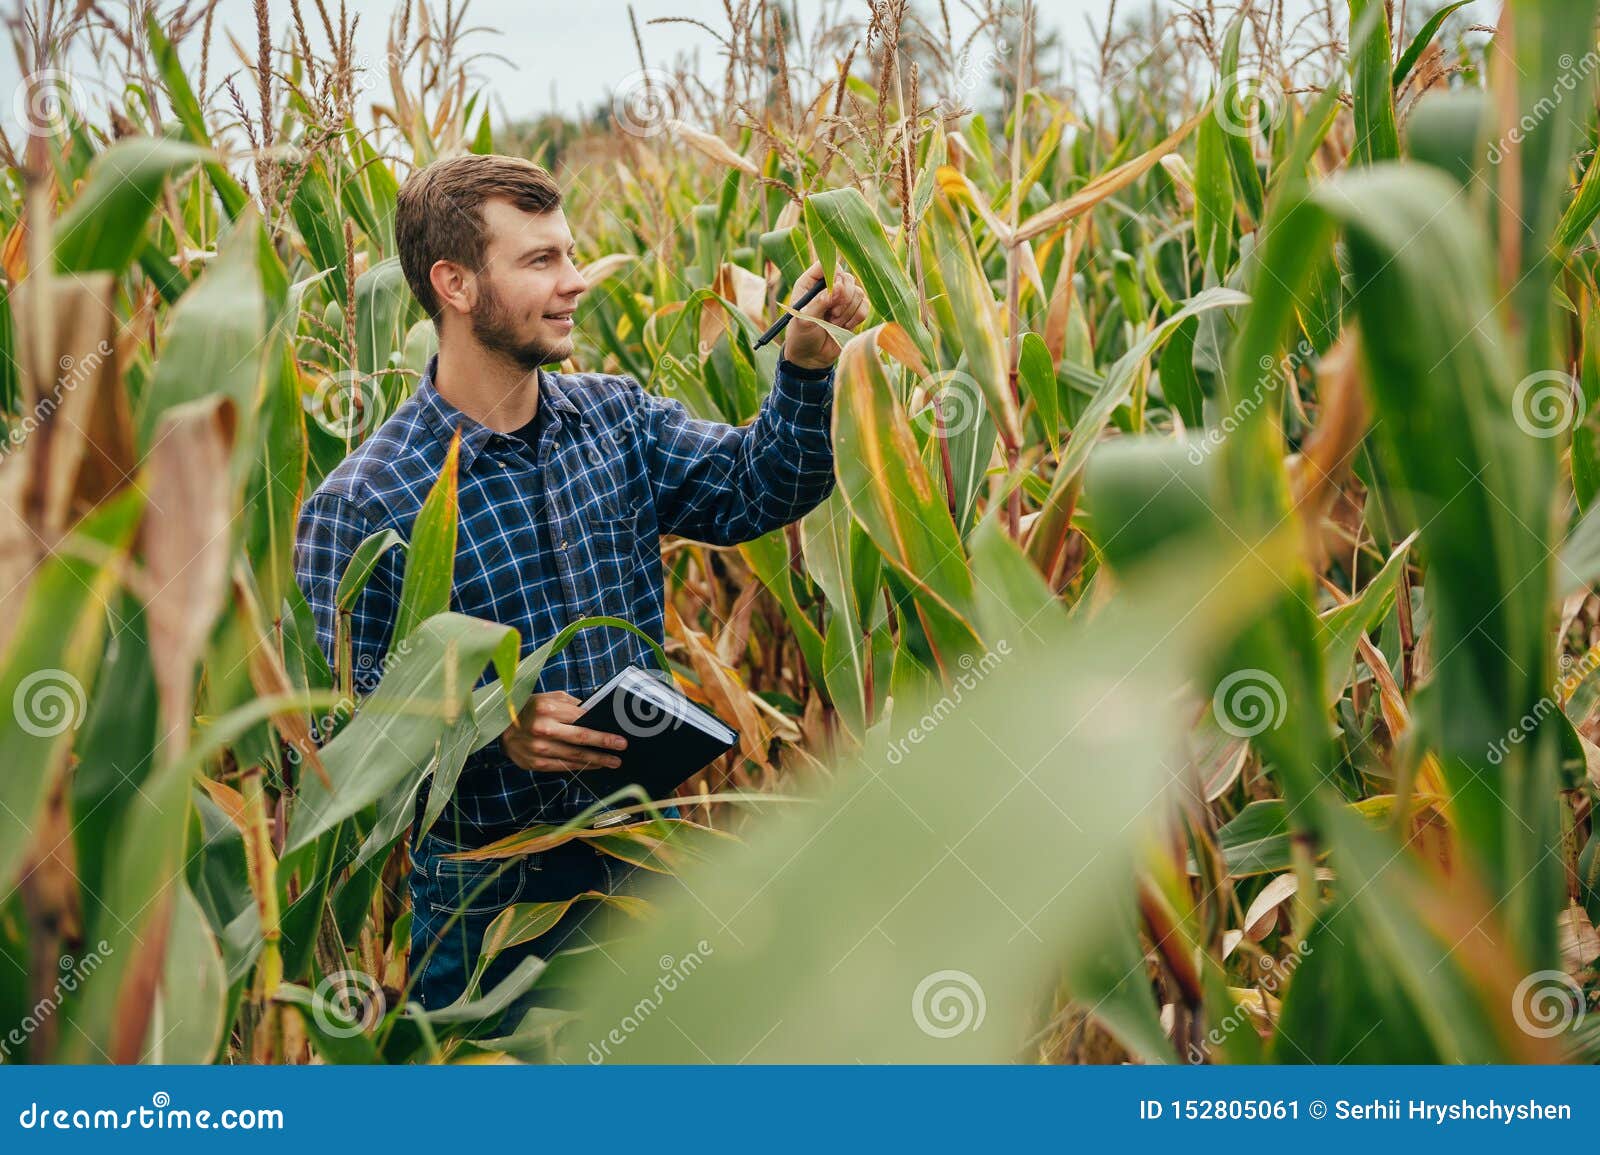 agronomist holds tablet touch pad computer in the corn field and examining crops before harvesting. agribusiness concept.